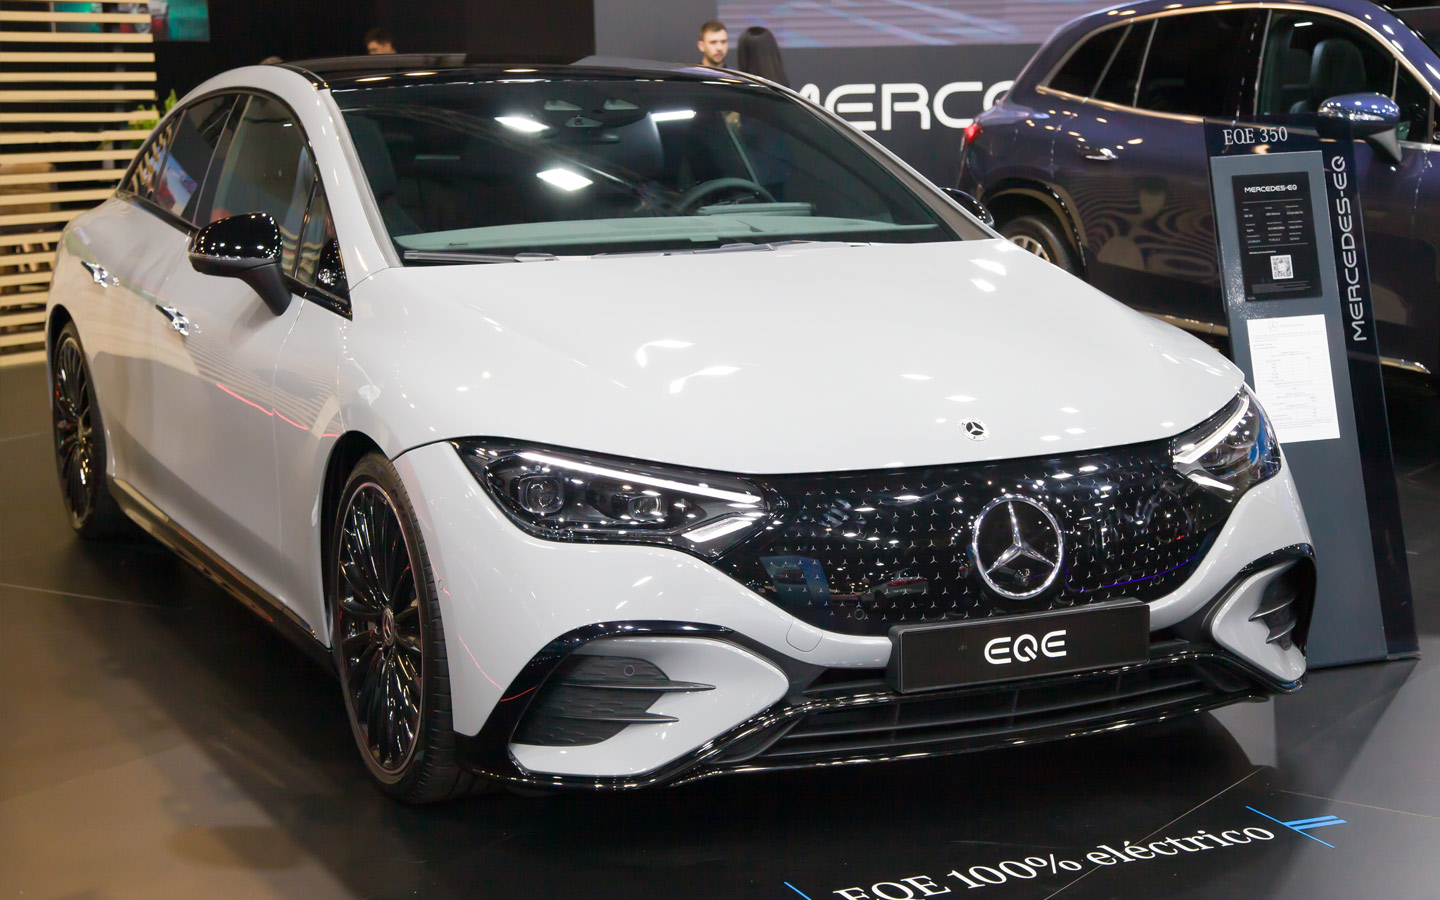 mercedes-benz eqe comes equipped with impressive performance features